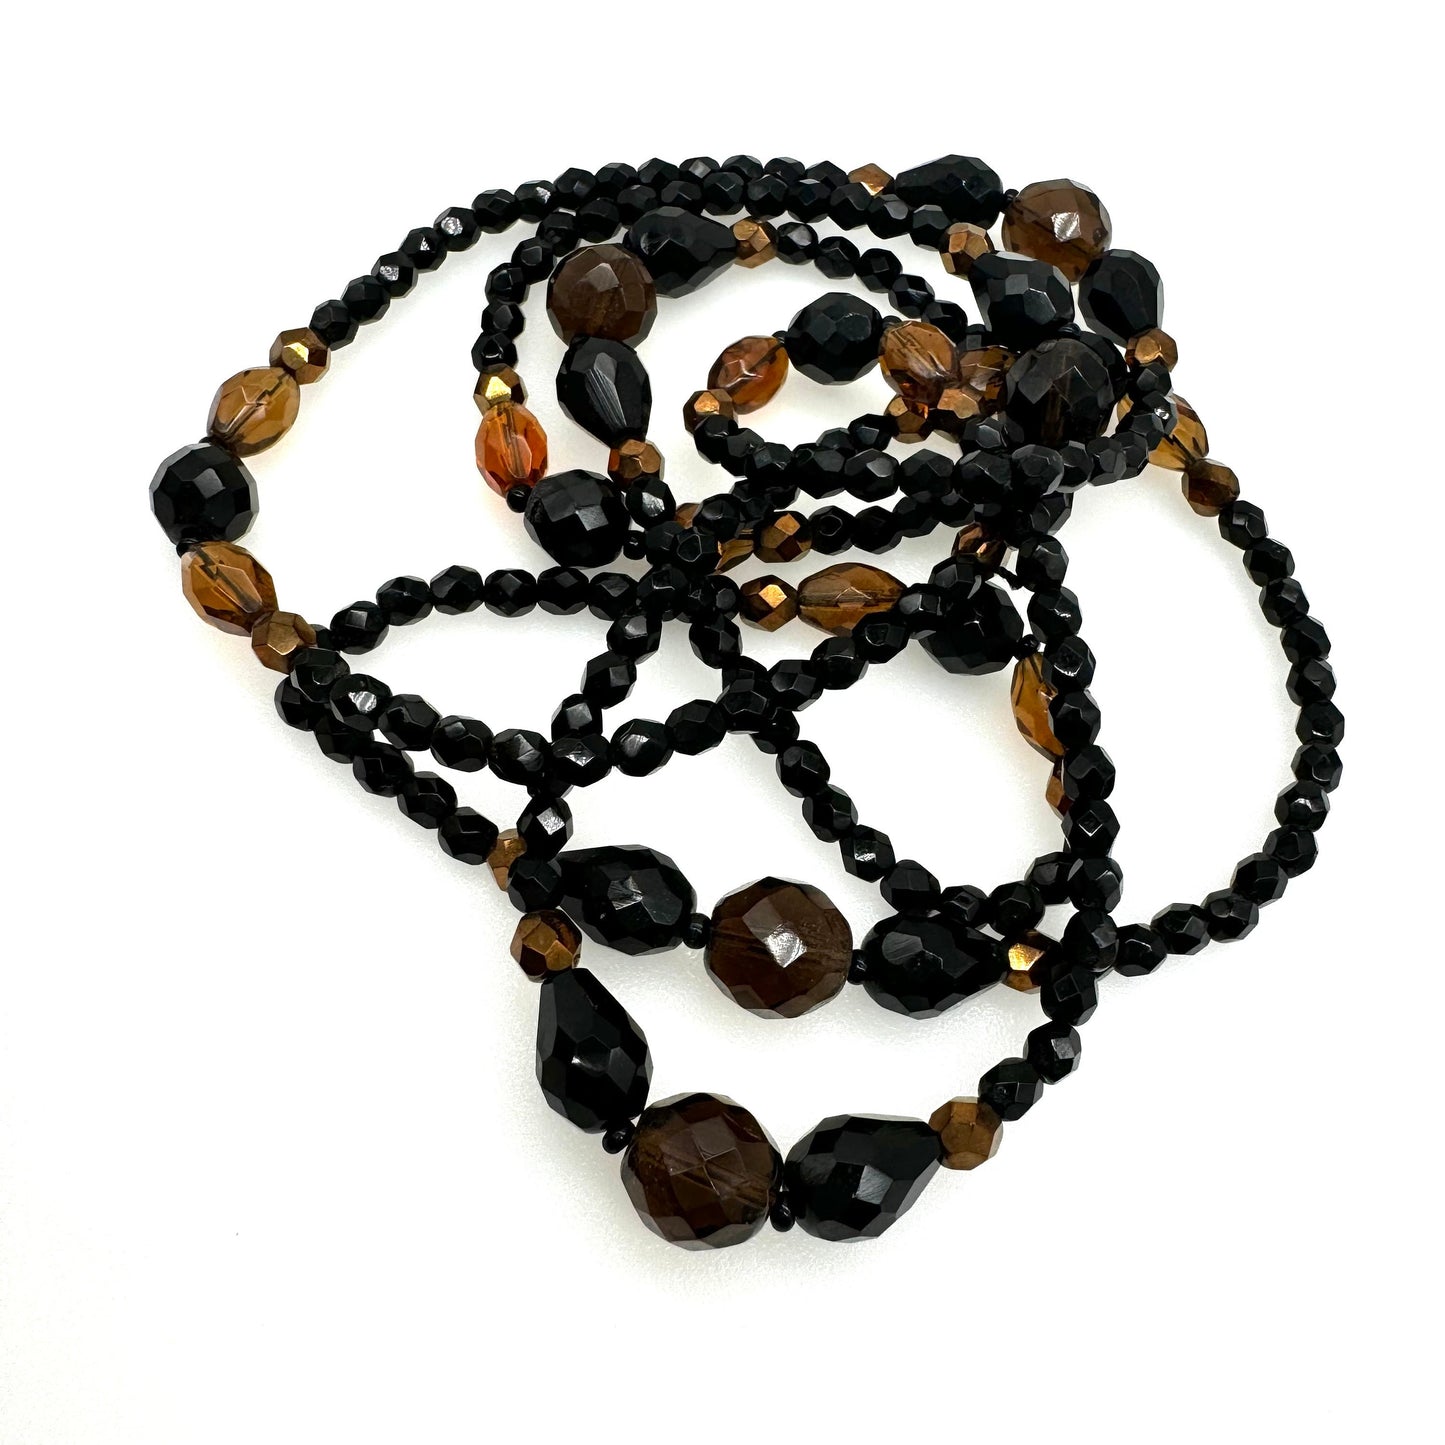 Long Black, Cognac and Smokey Vari Shape Faceted Glass Bead Necklace